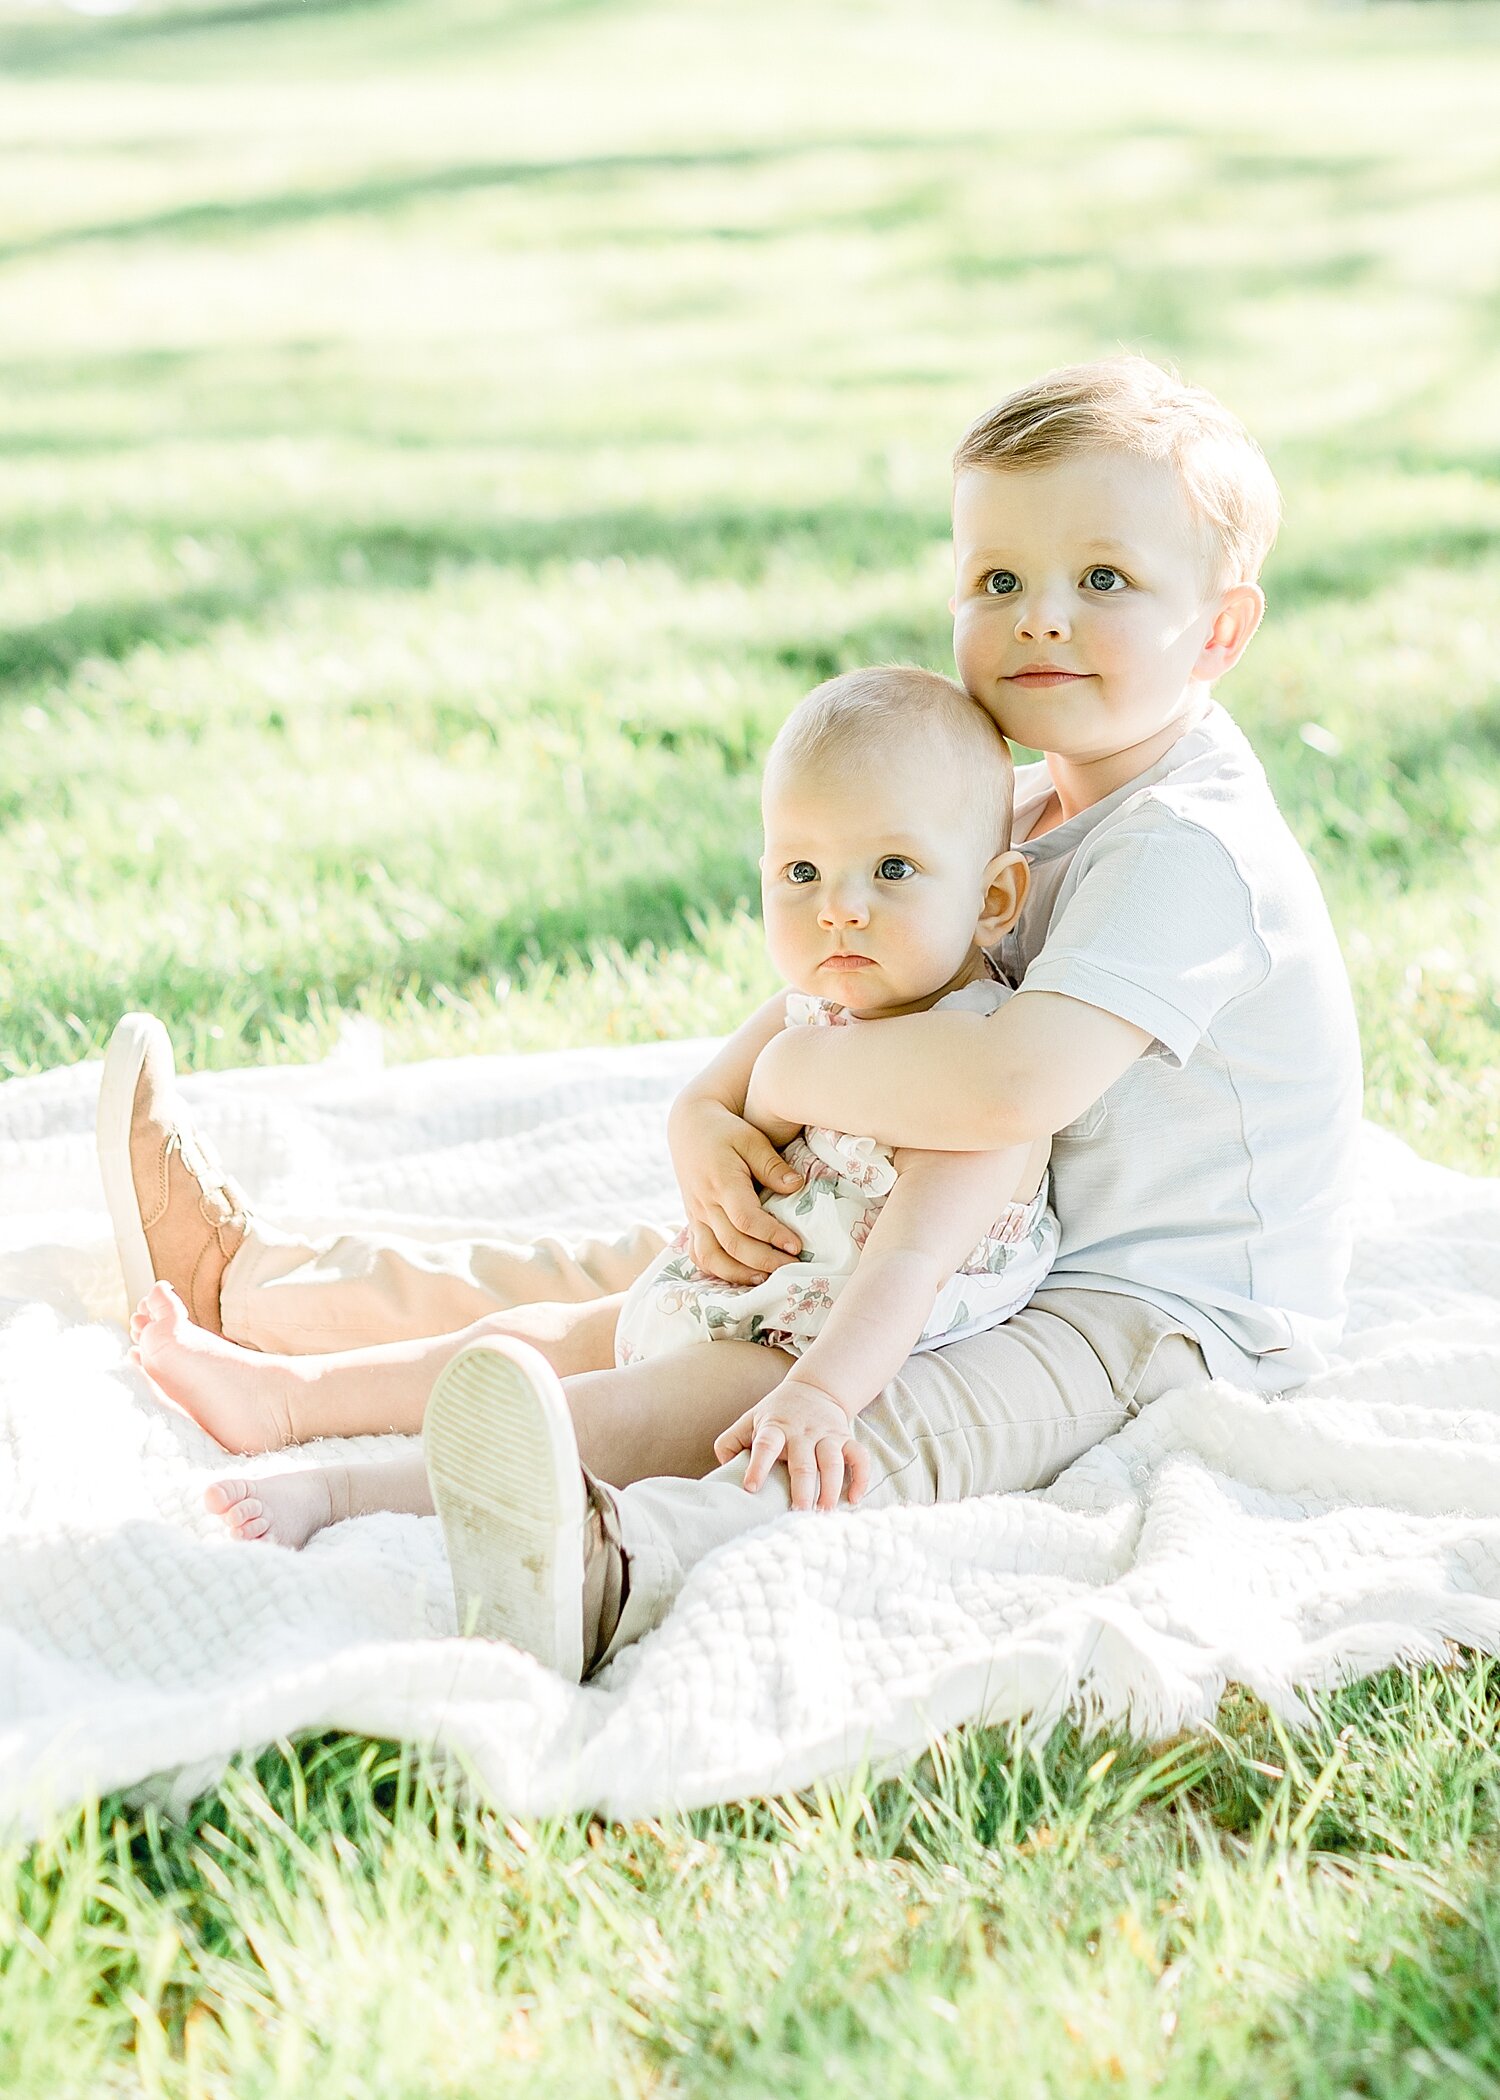 Brother and sister sitting together | Kristin Wood Photography